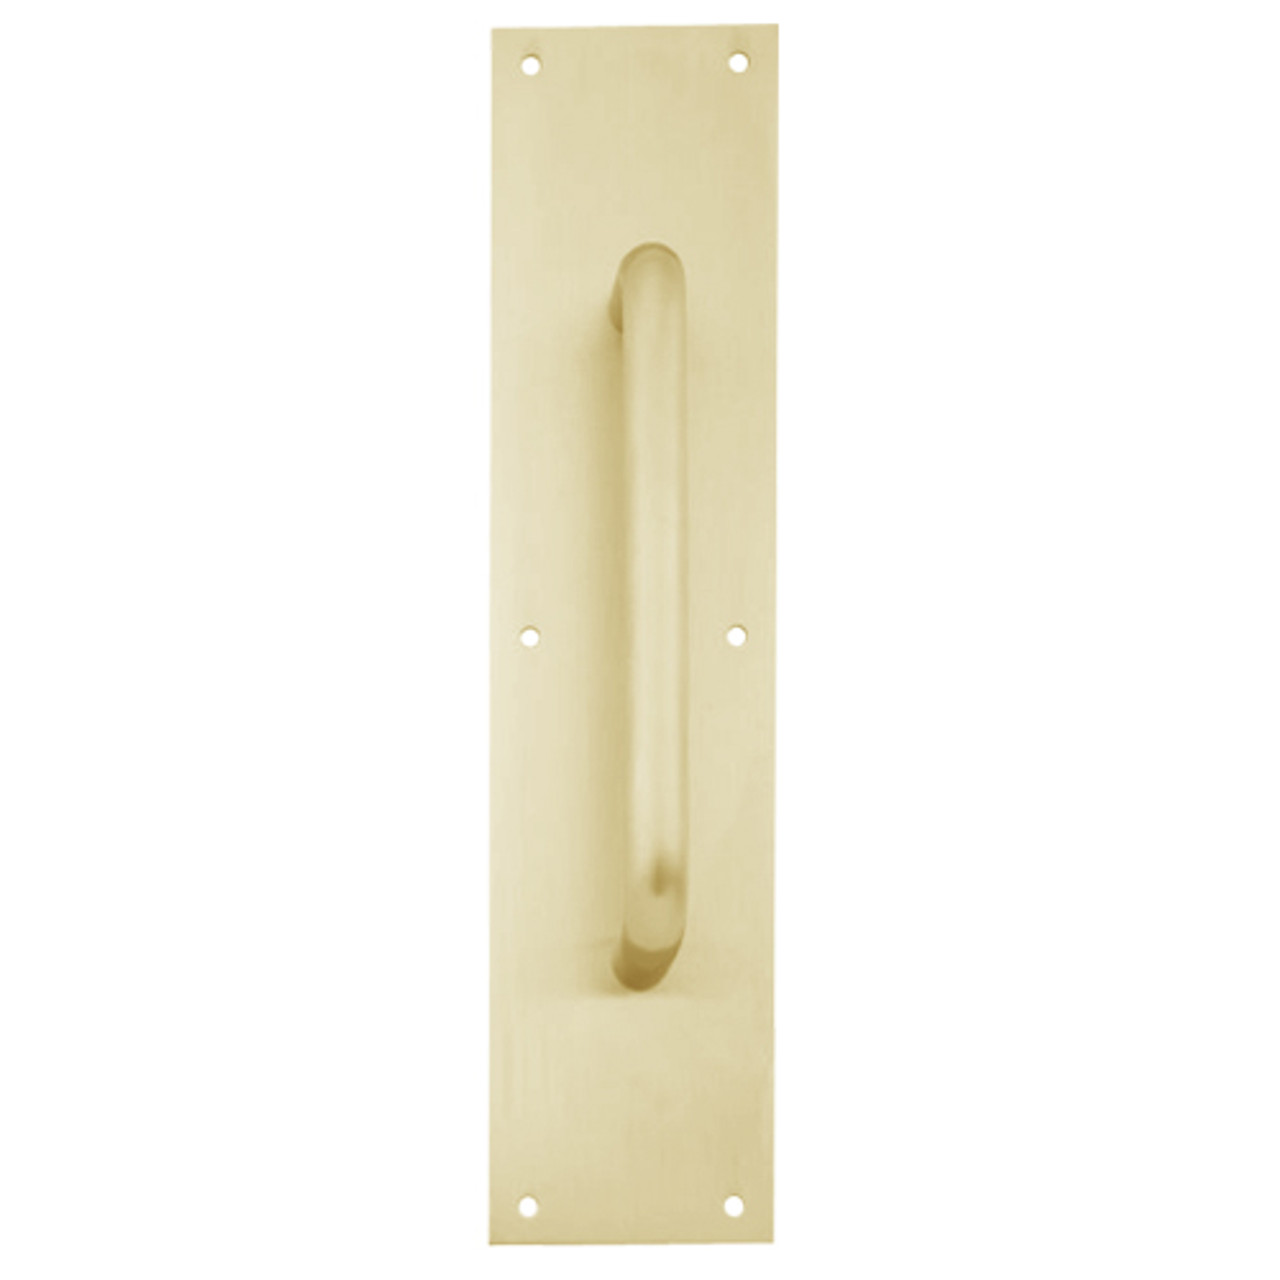 8302-10-US4-6x16 IVES Architectural Door Trim 6x16 Inch Pull Plate in Satin Brass